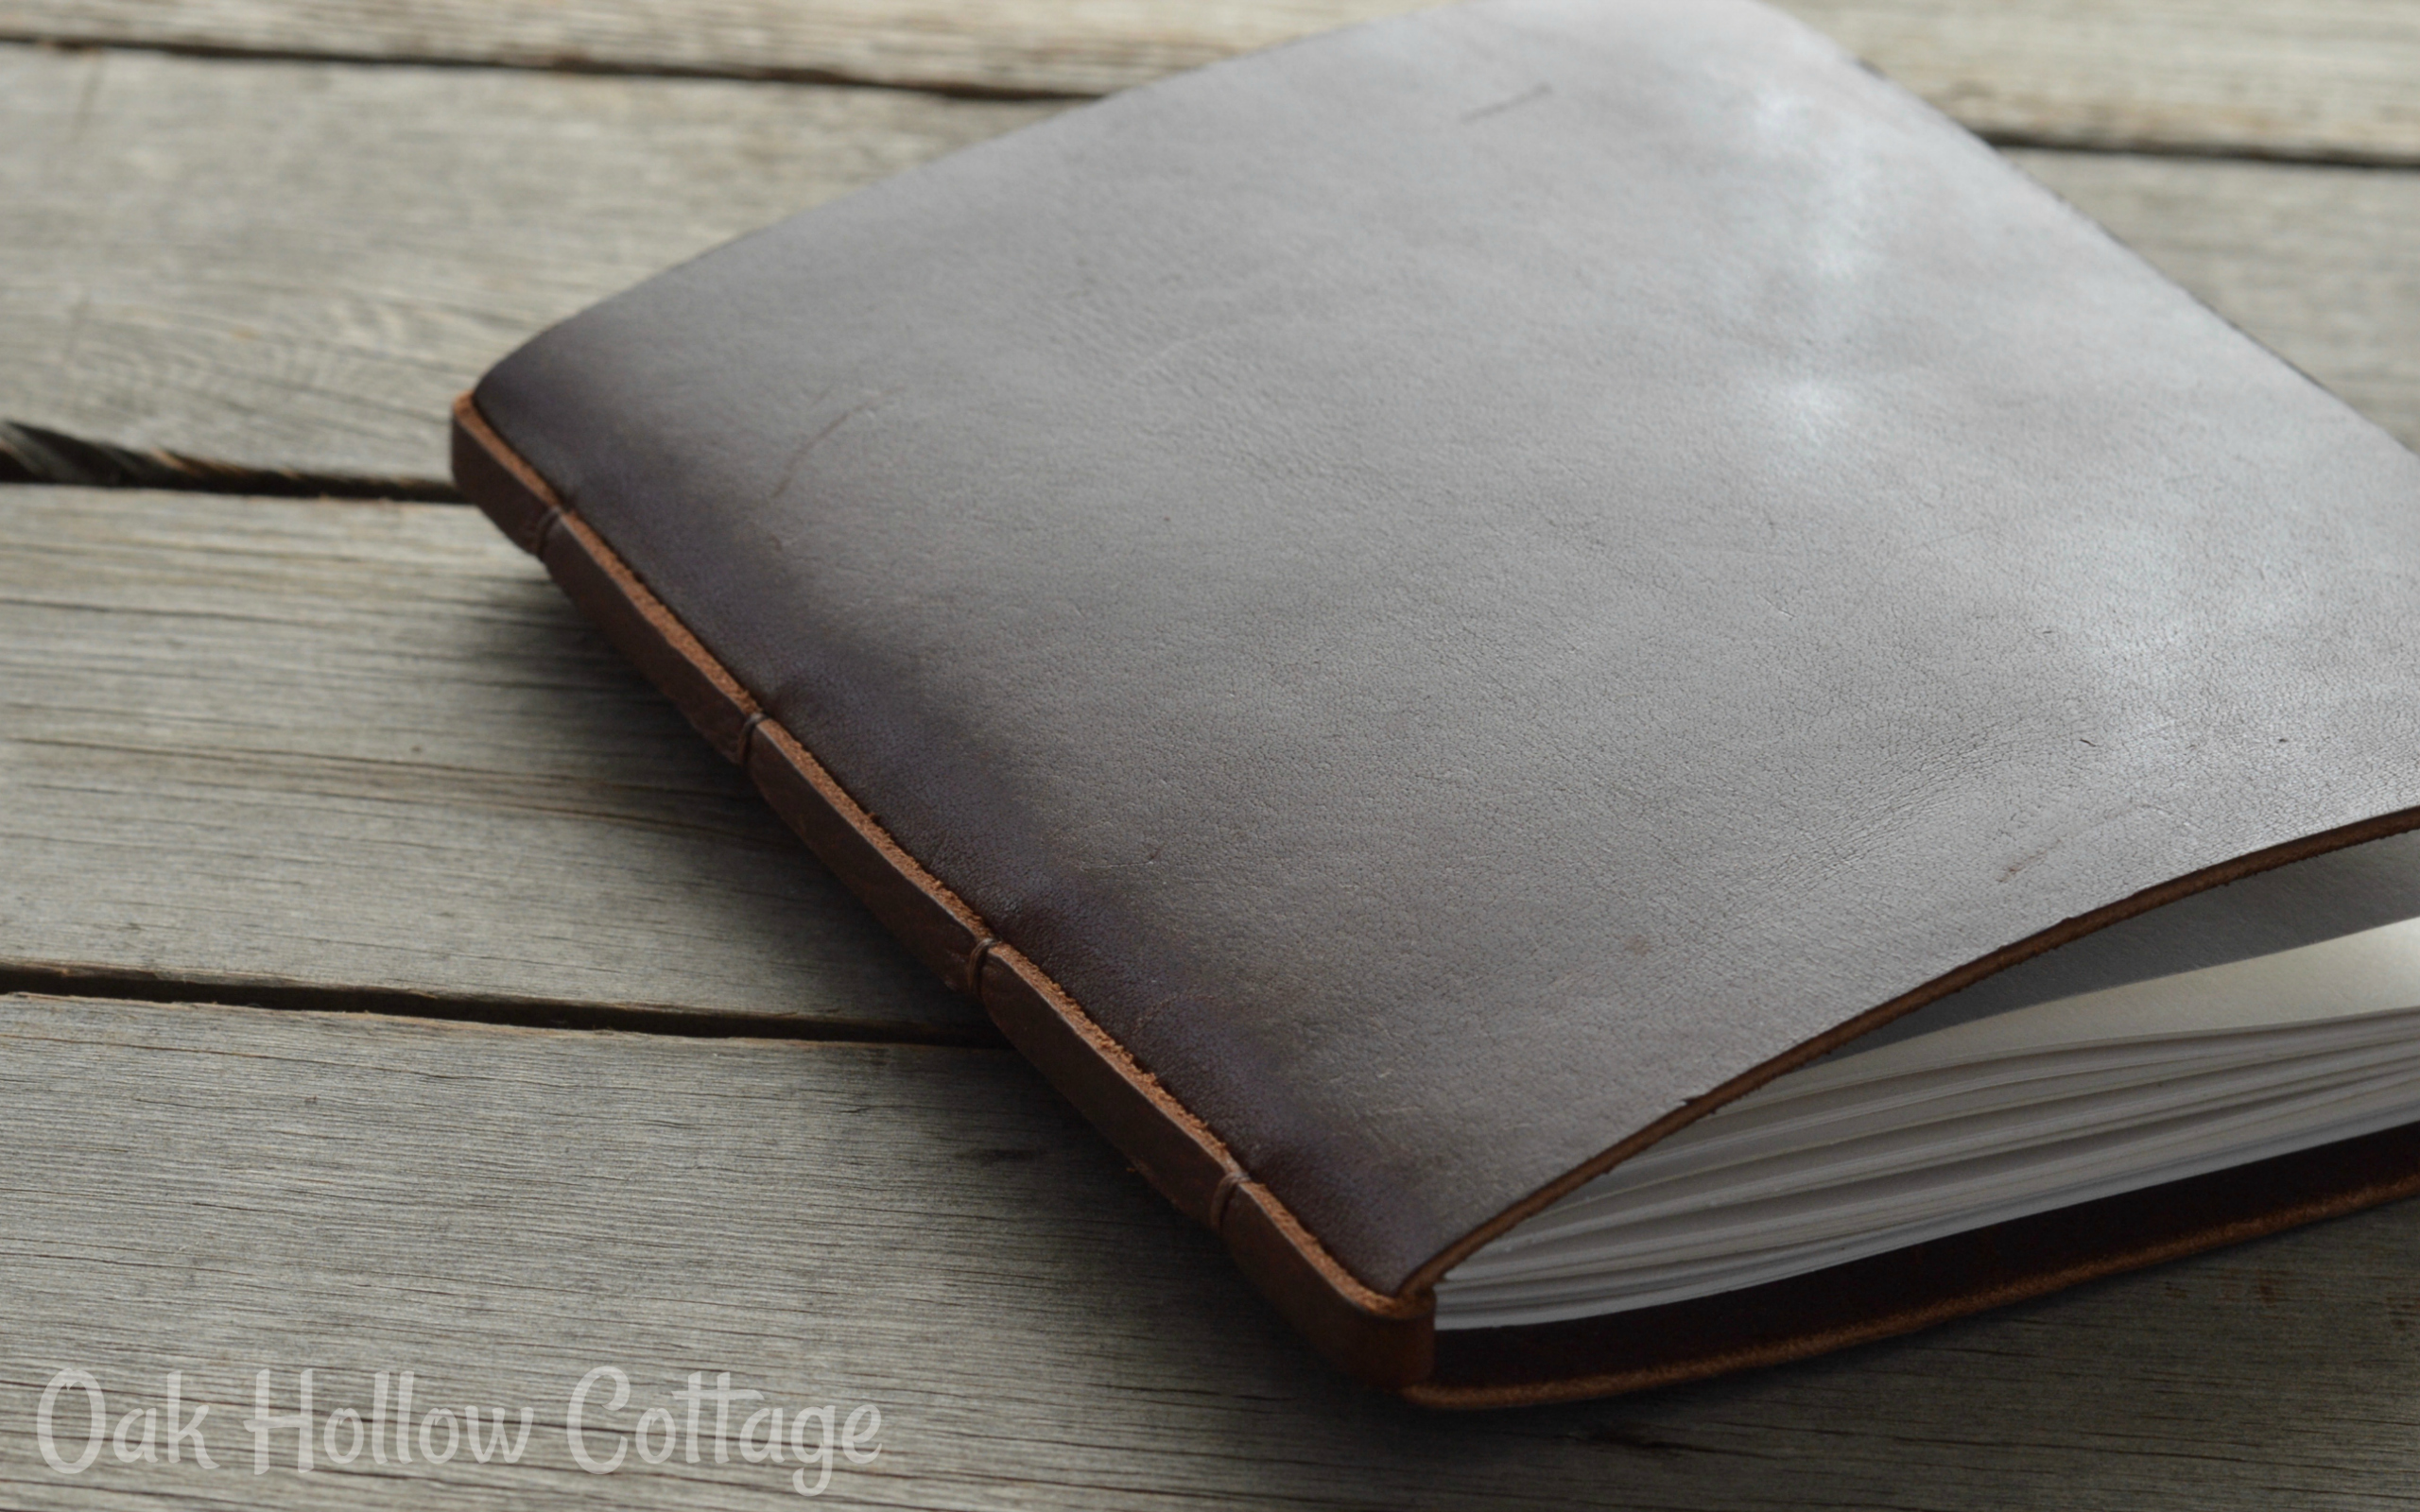 A handmade leather travel or nature journal is the perfect gift for any occasion. Find them at etsy.com/shop/oakhollowcottage. 